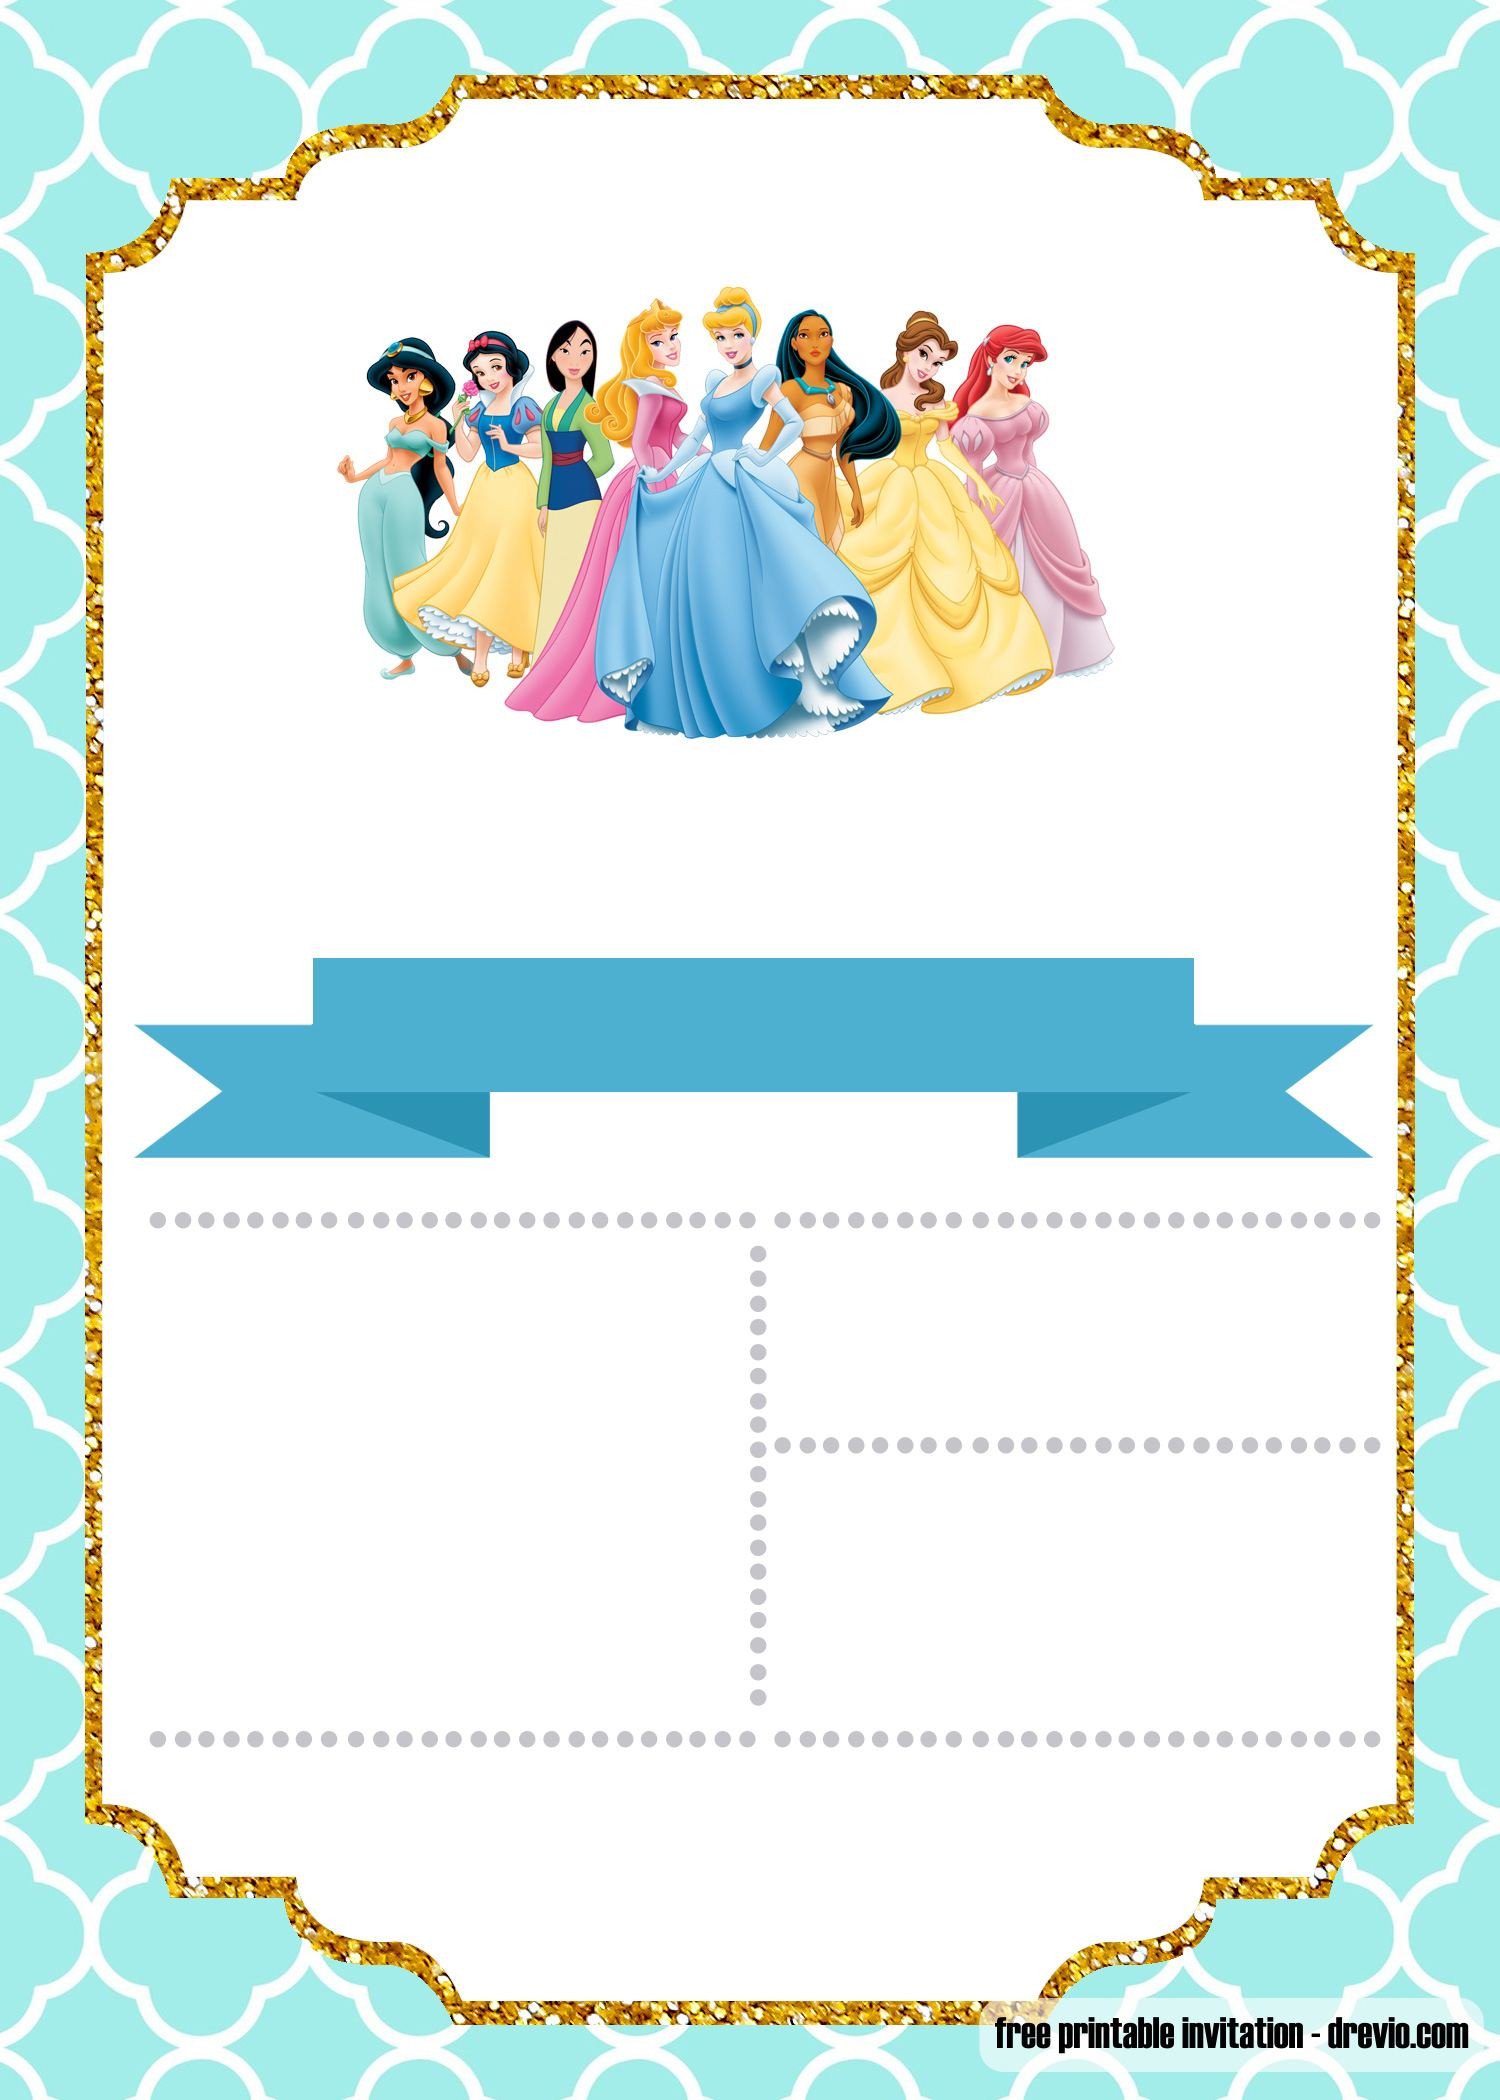 FREE Disney Princess Invitation Template for Your Little